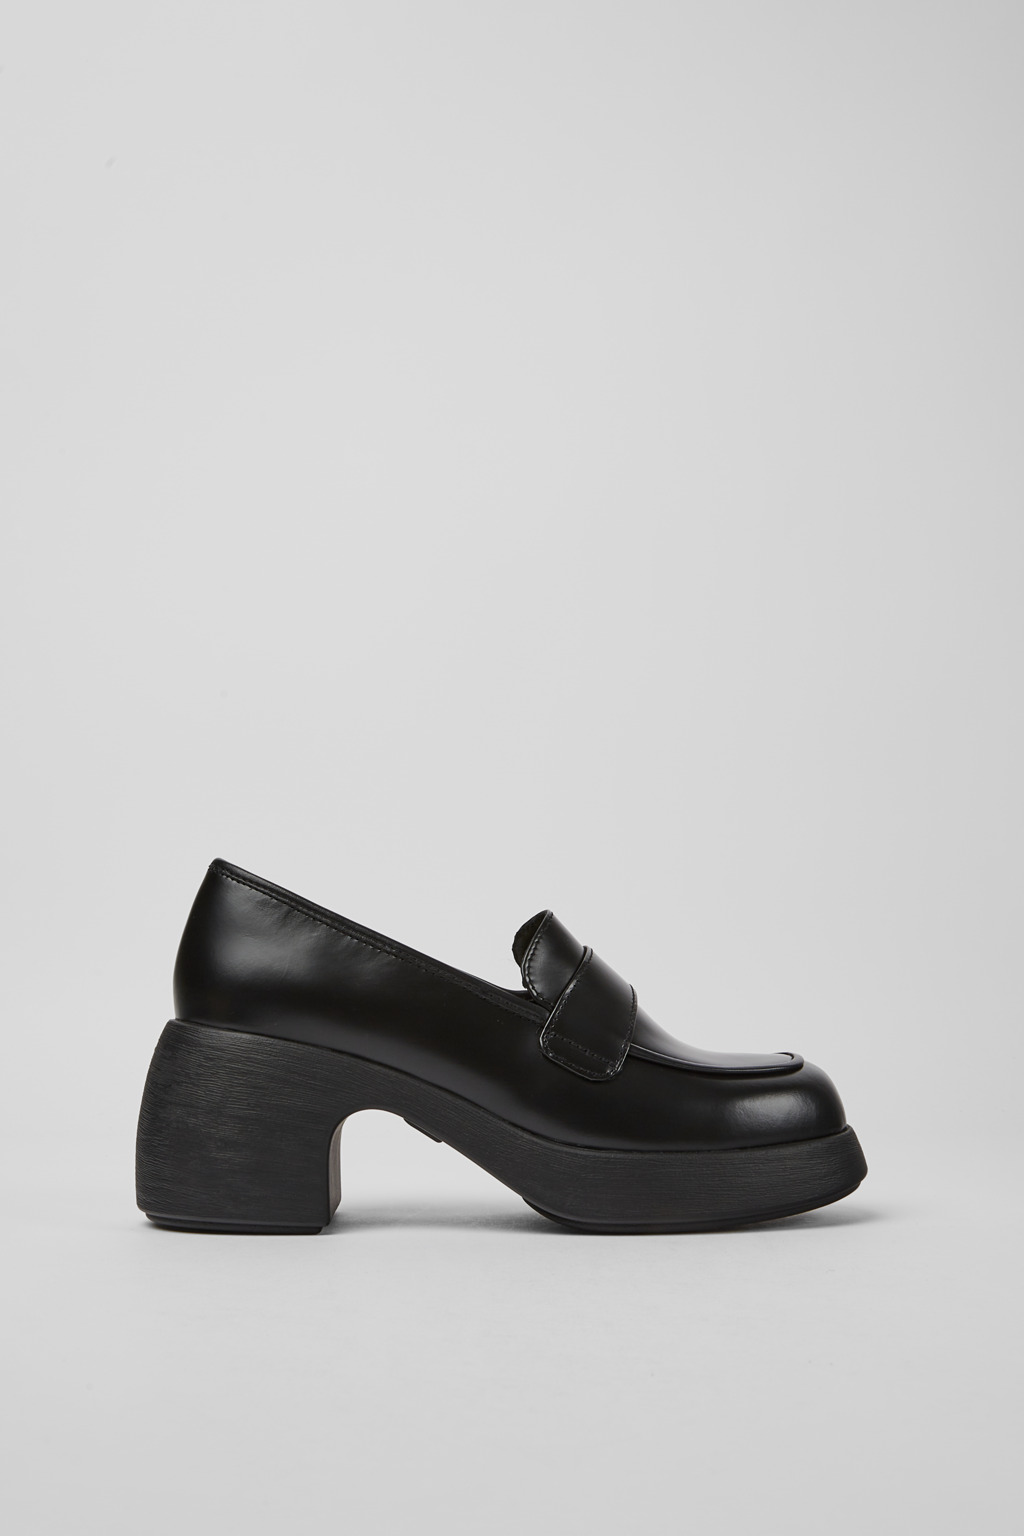 Thelma Black Formal Shoes for Women - Camper Shoes